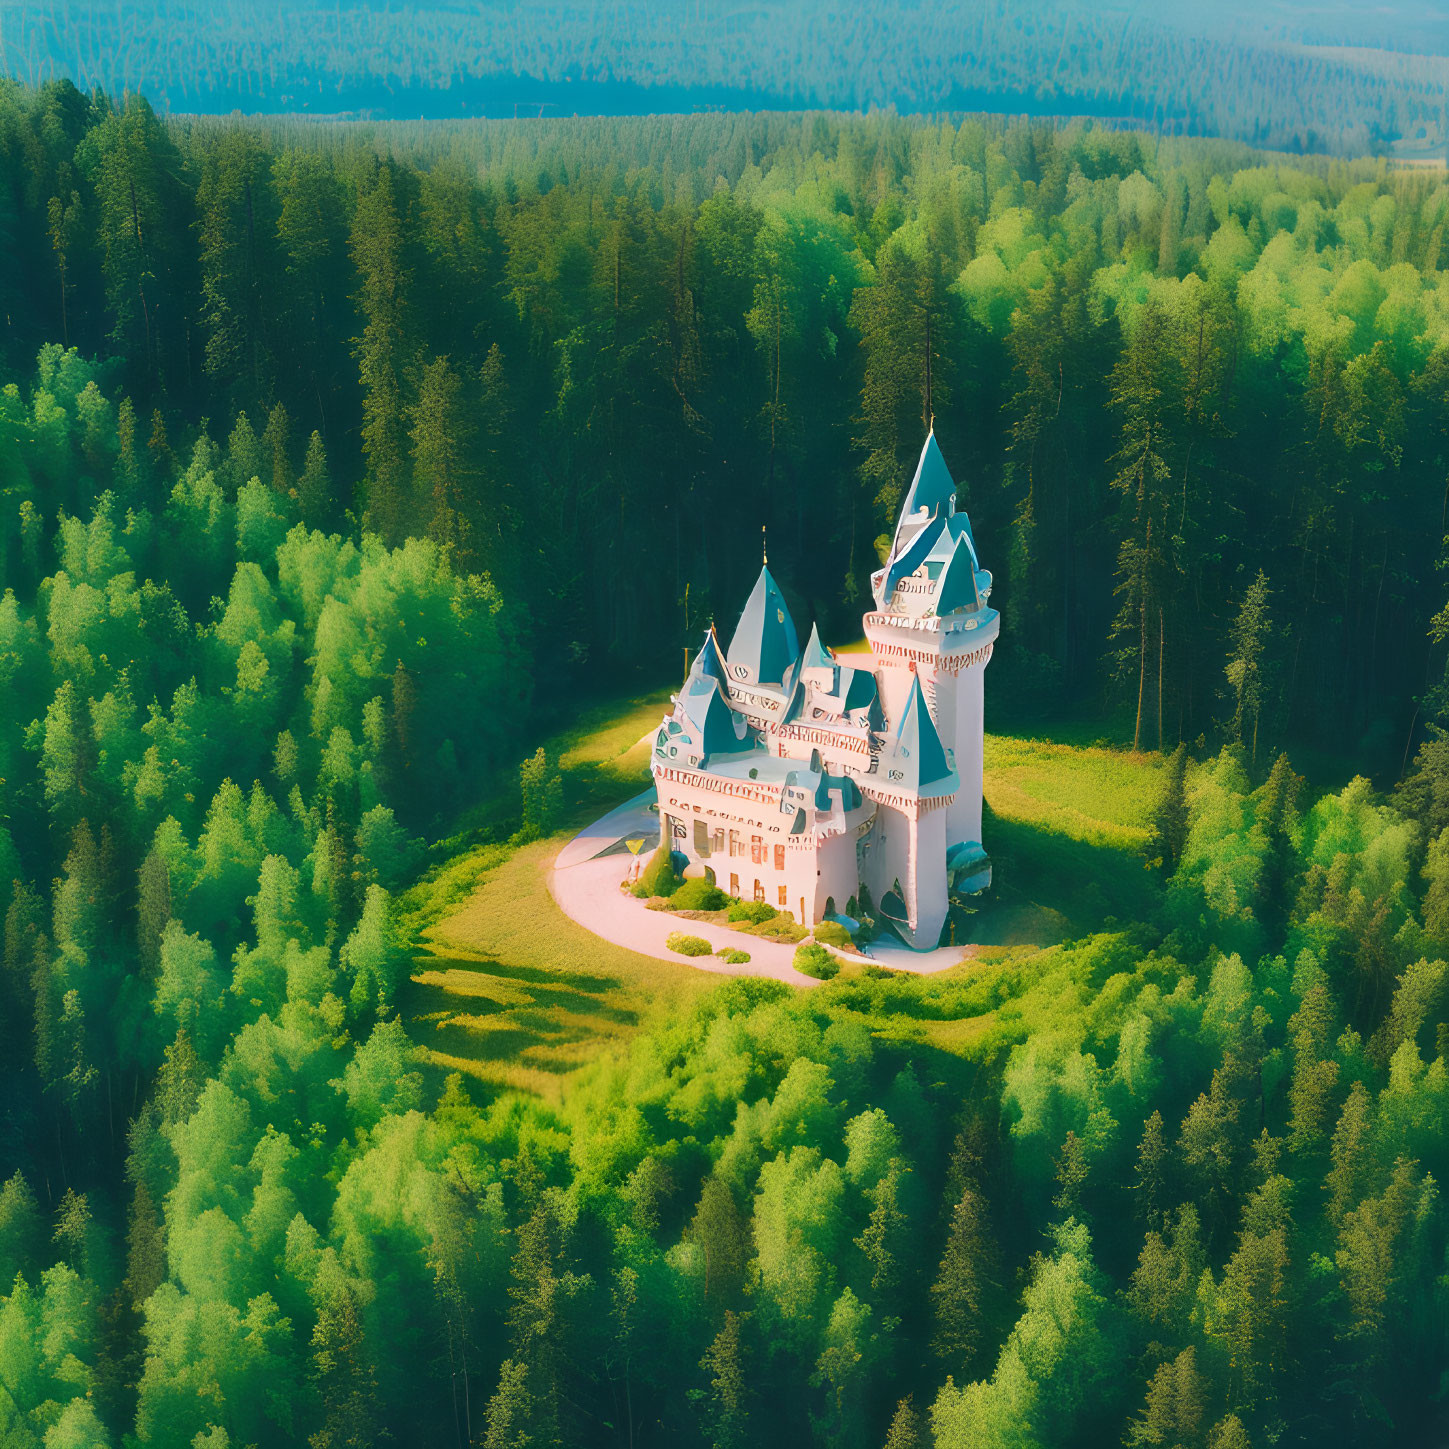 Castle with Blue Roofs in Forest Clearing under Sunlight